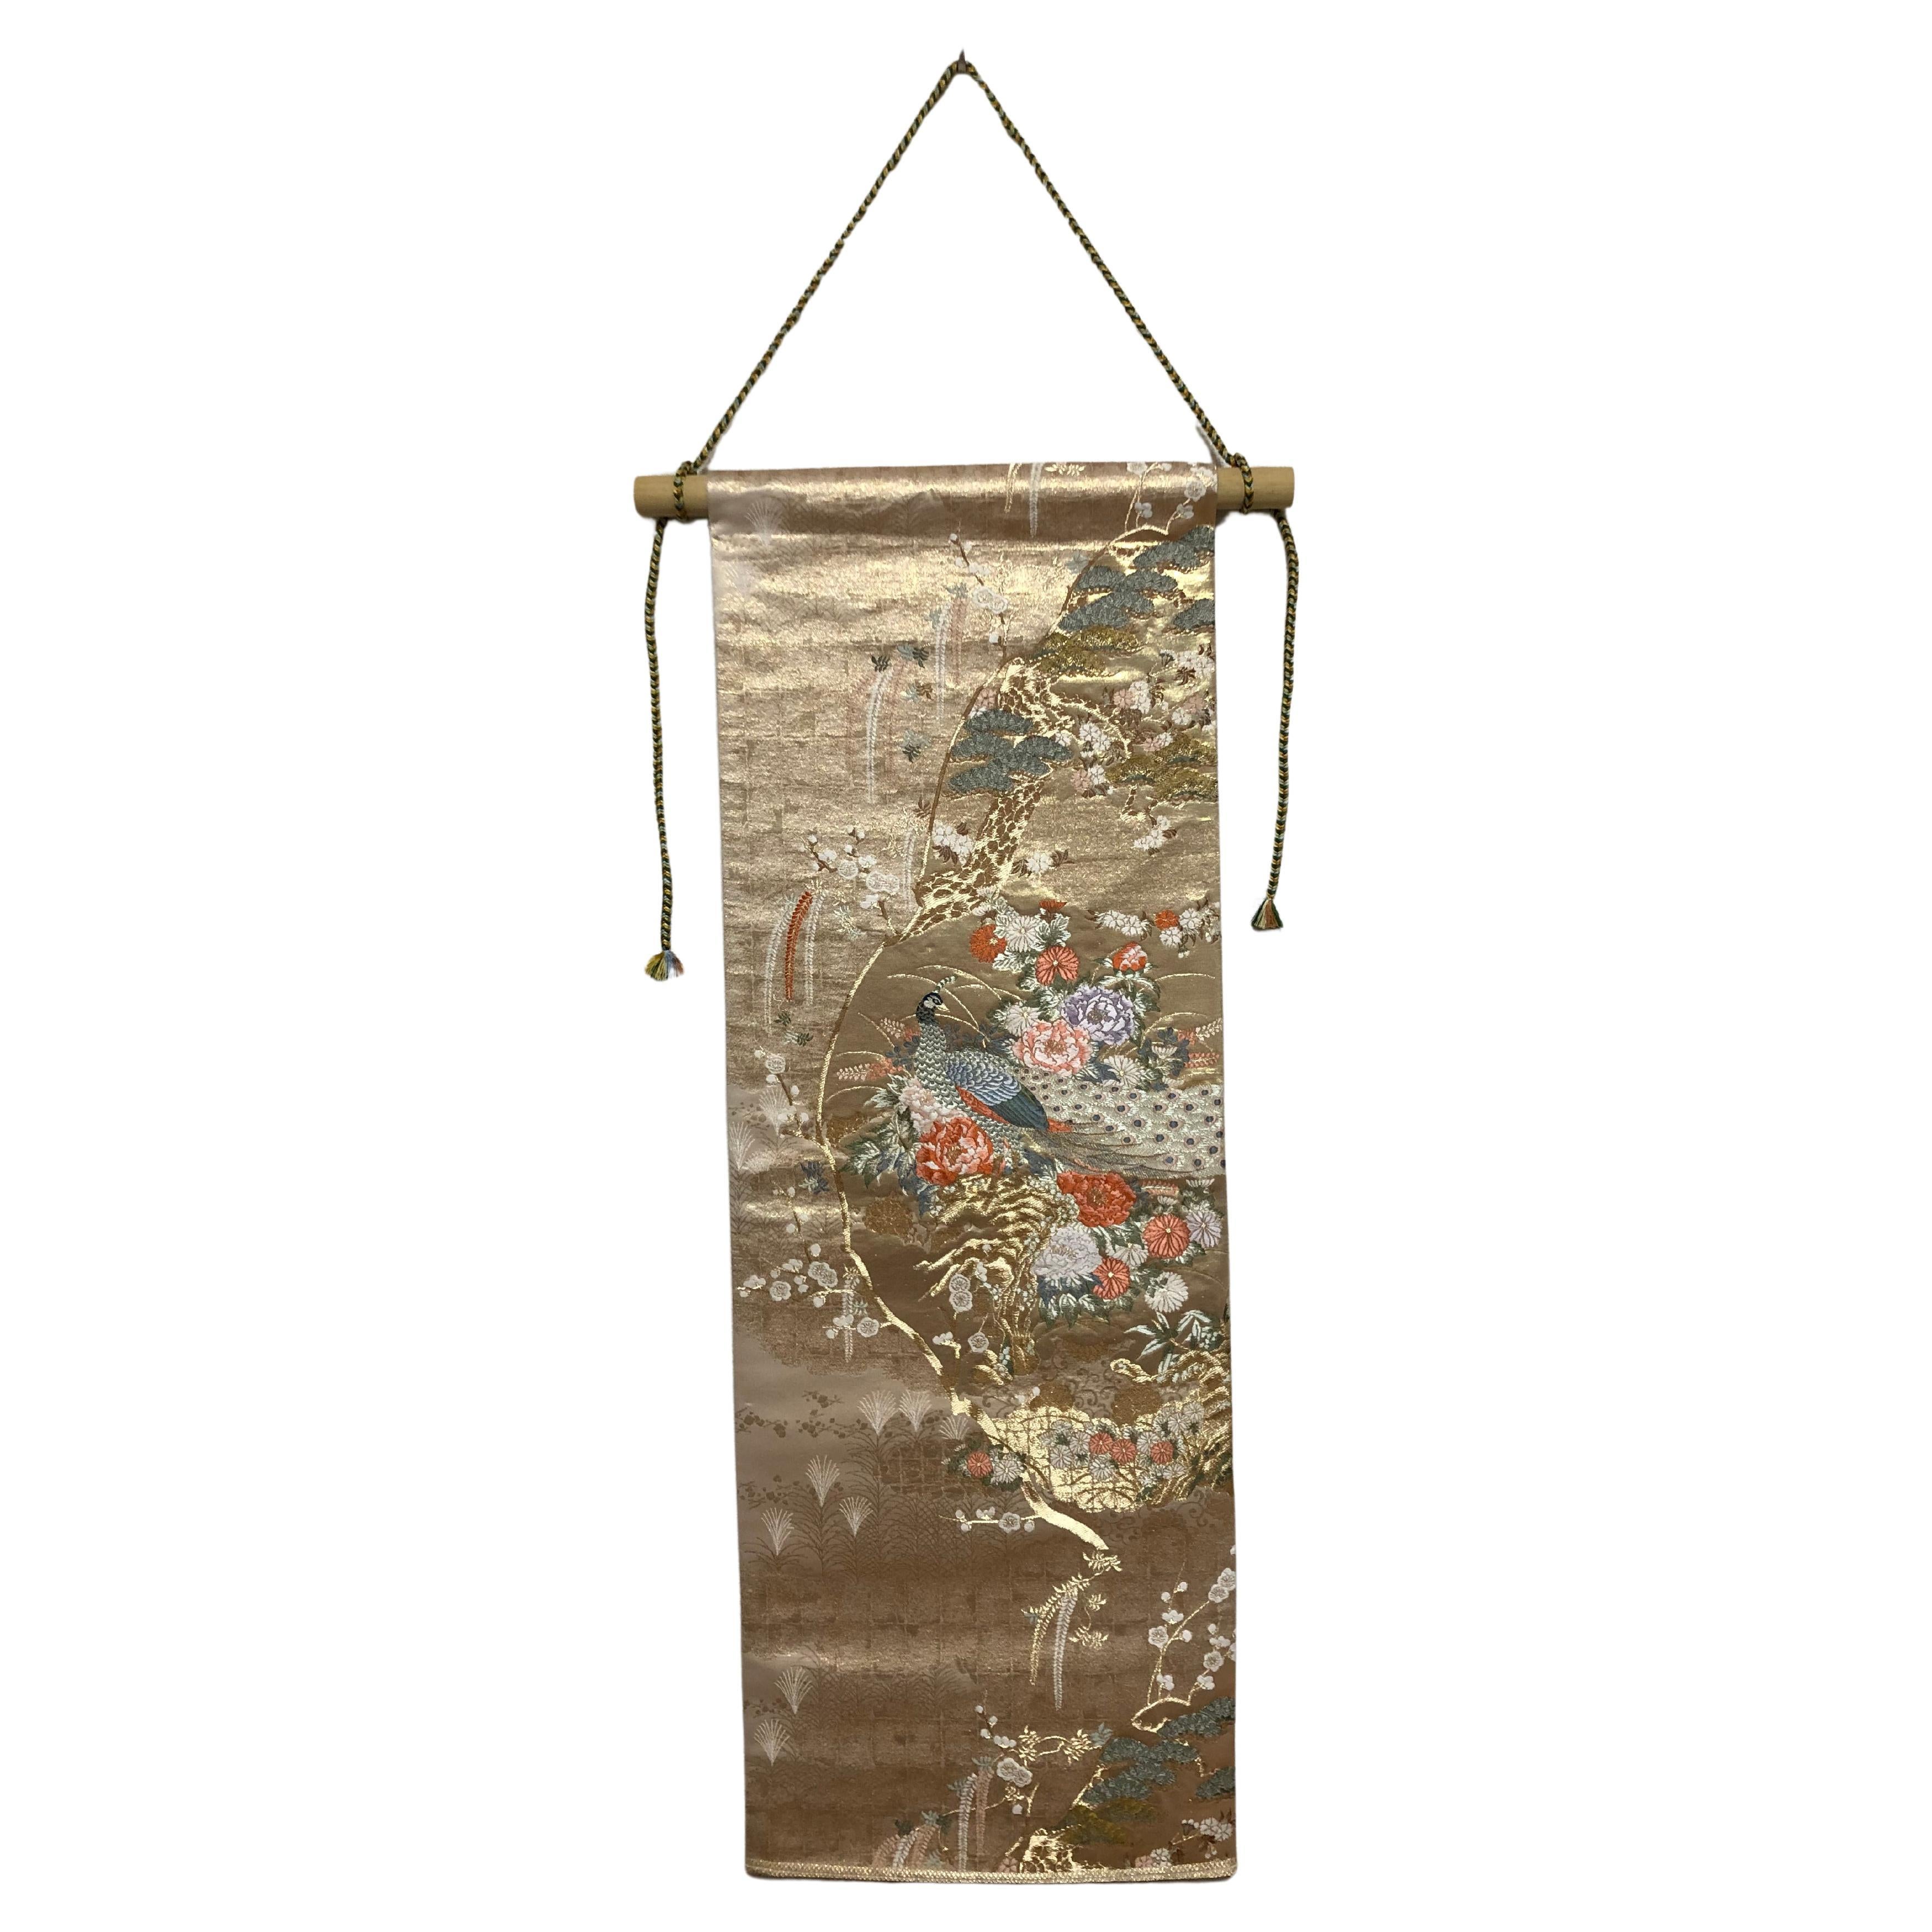 Kimono Tapestry “The Queen of Peacocks” , Japanese Art, Japanese Hanging Scroll For Sale